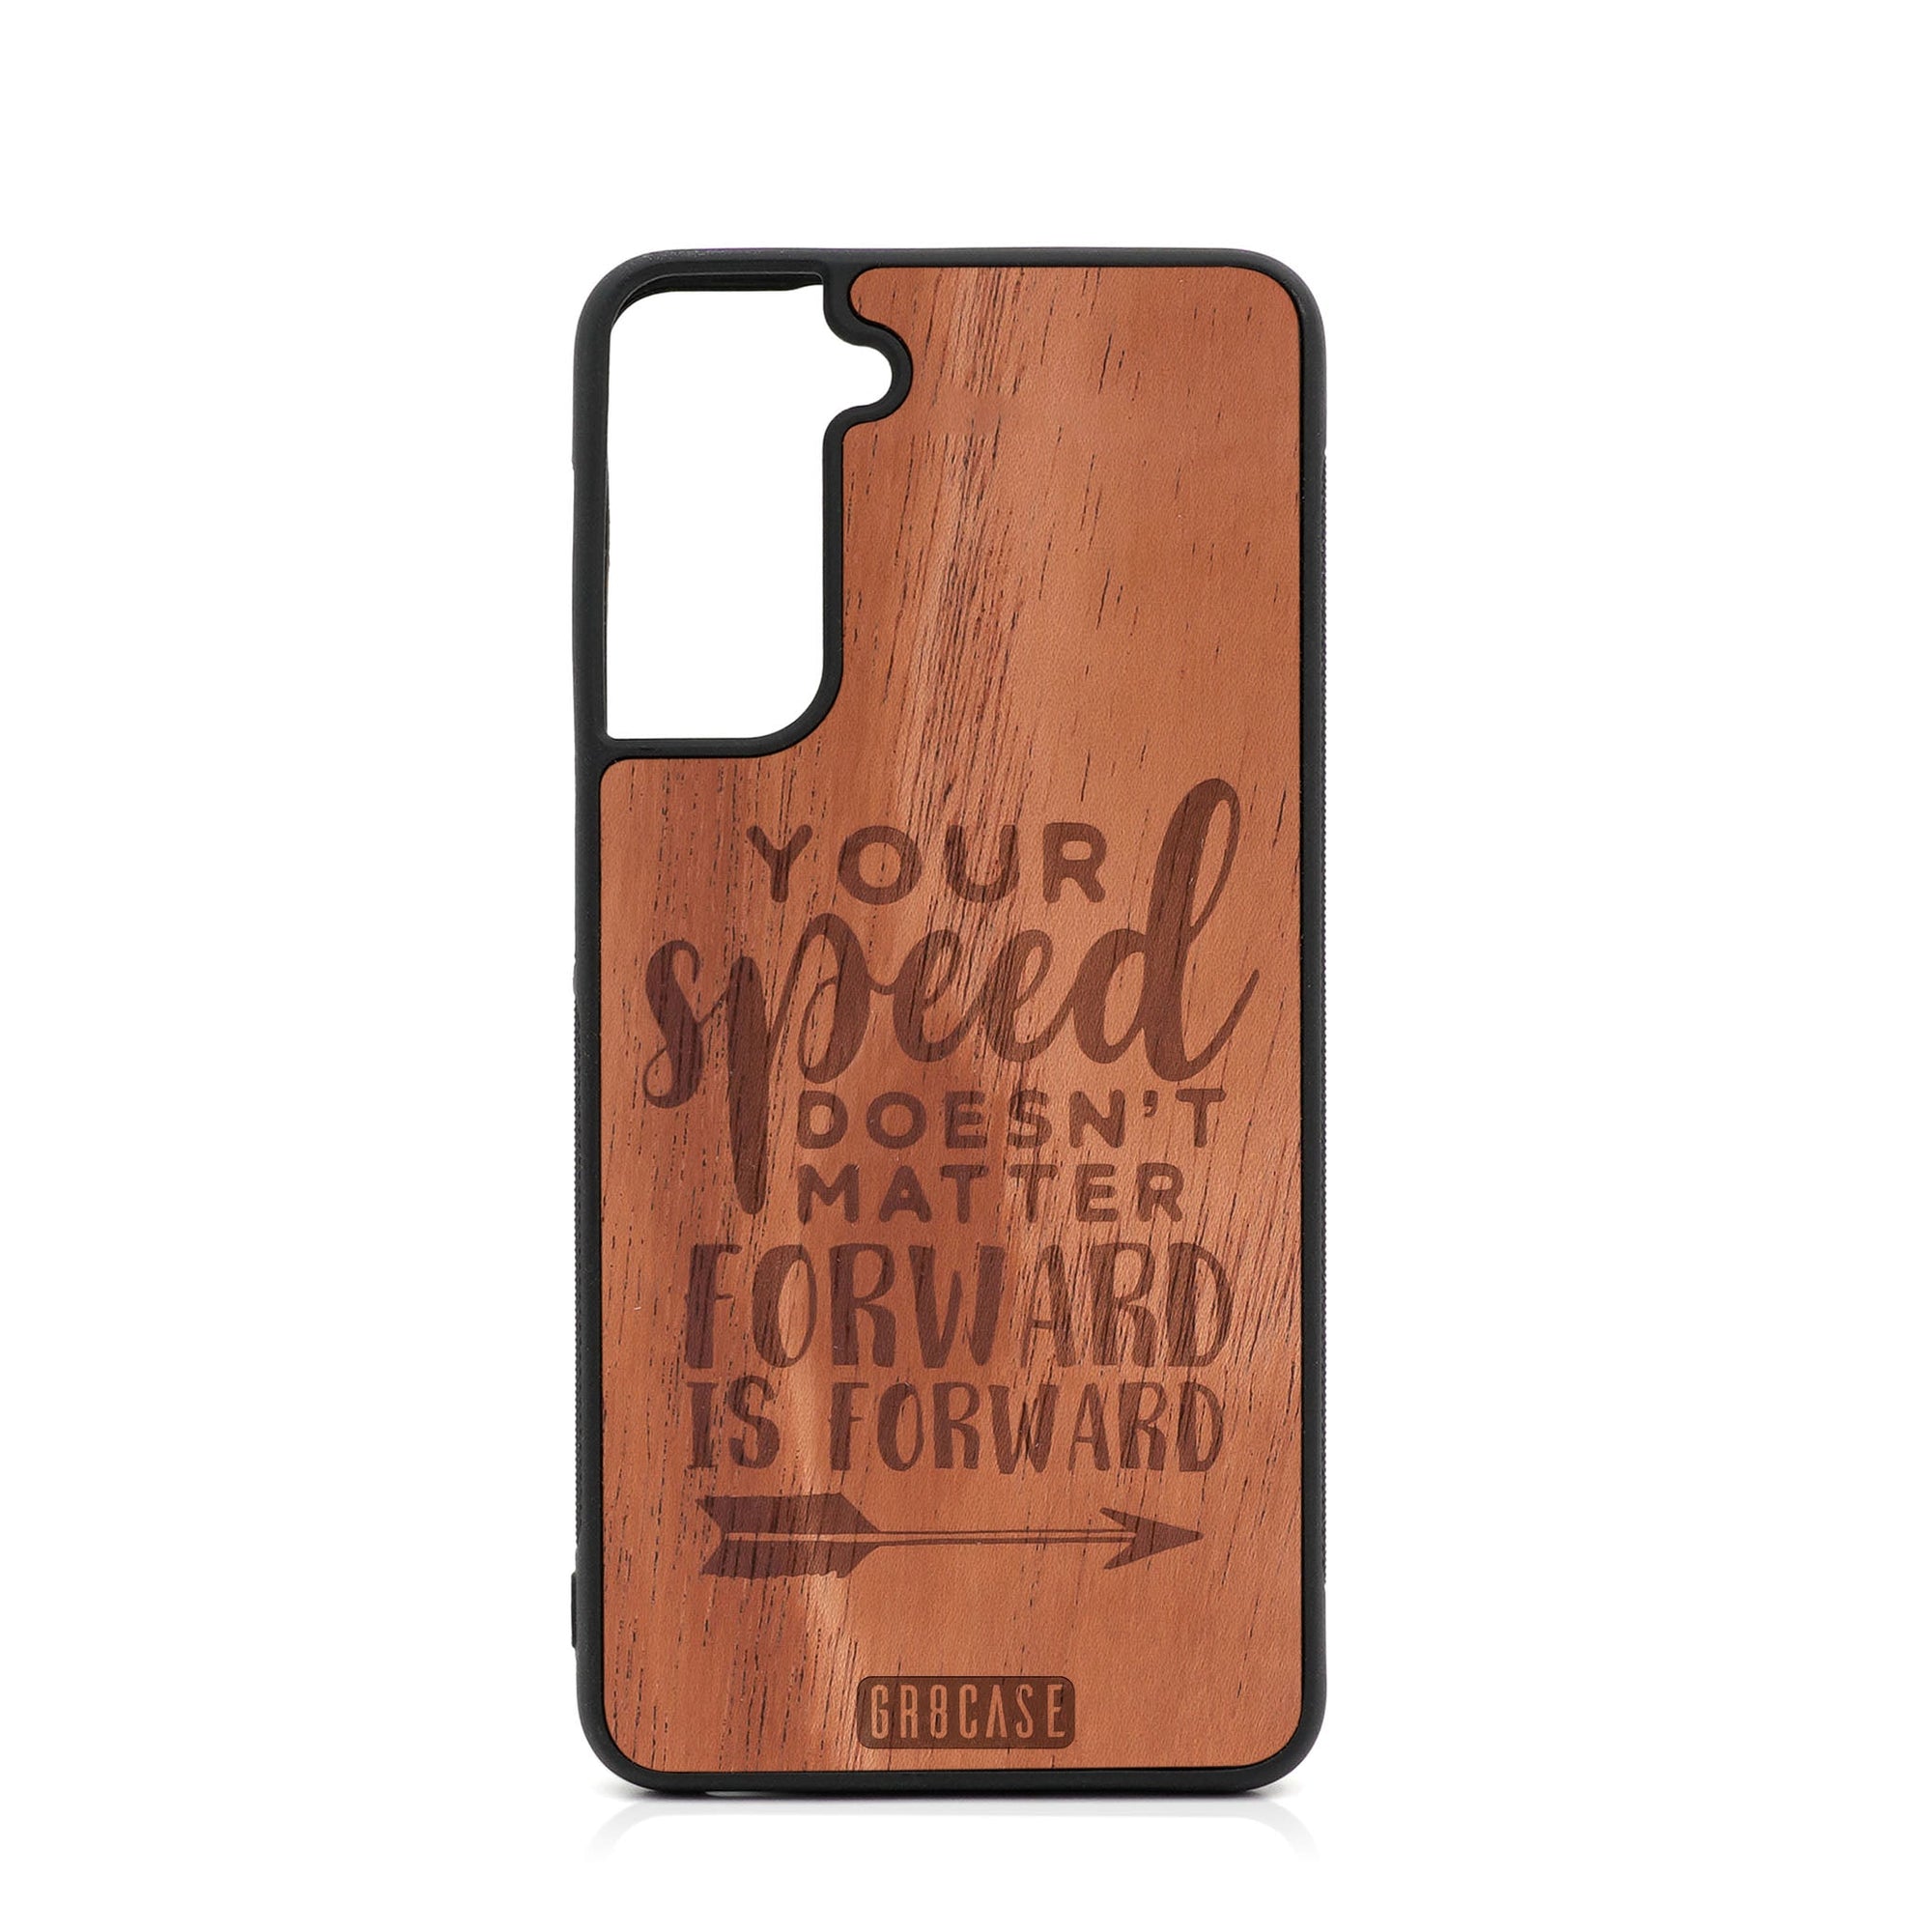 Your Speed Doesn't Matter Forward Is Forward Design Wood Case For Samsung Galaxy S22